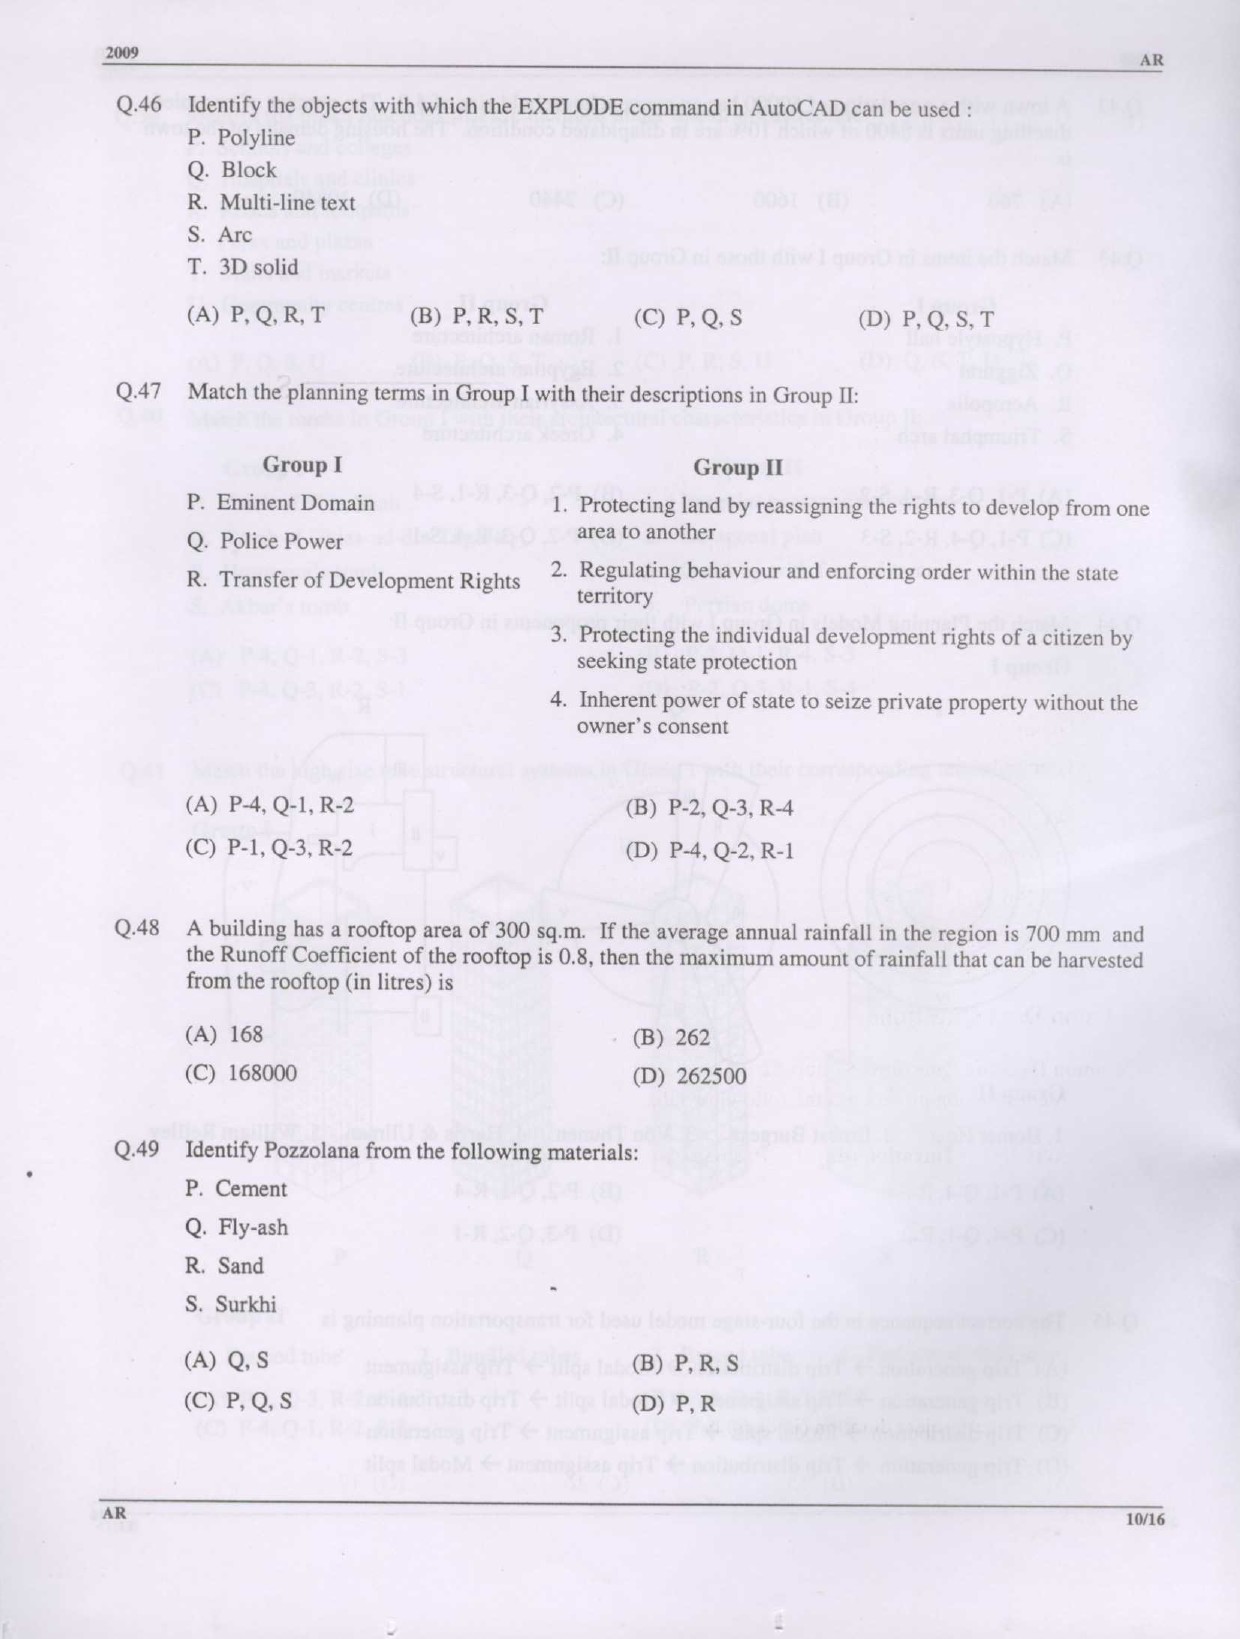 GATE Exam Question Paper 2009 Architecture and Planning 10